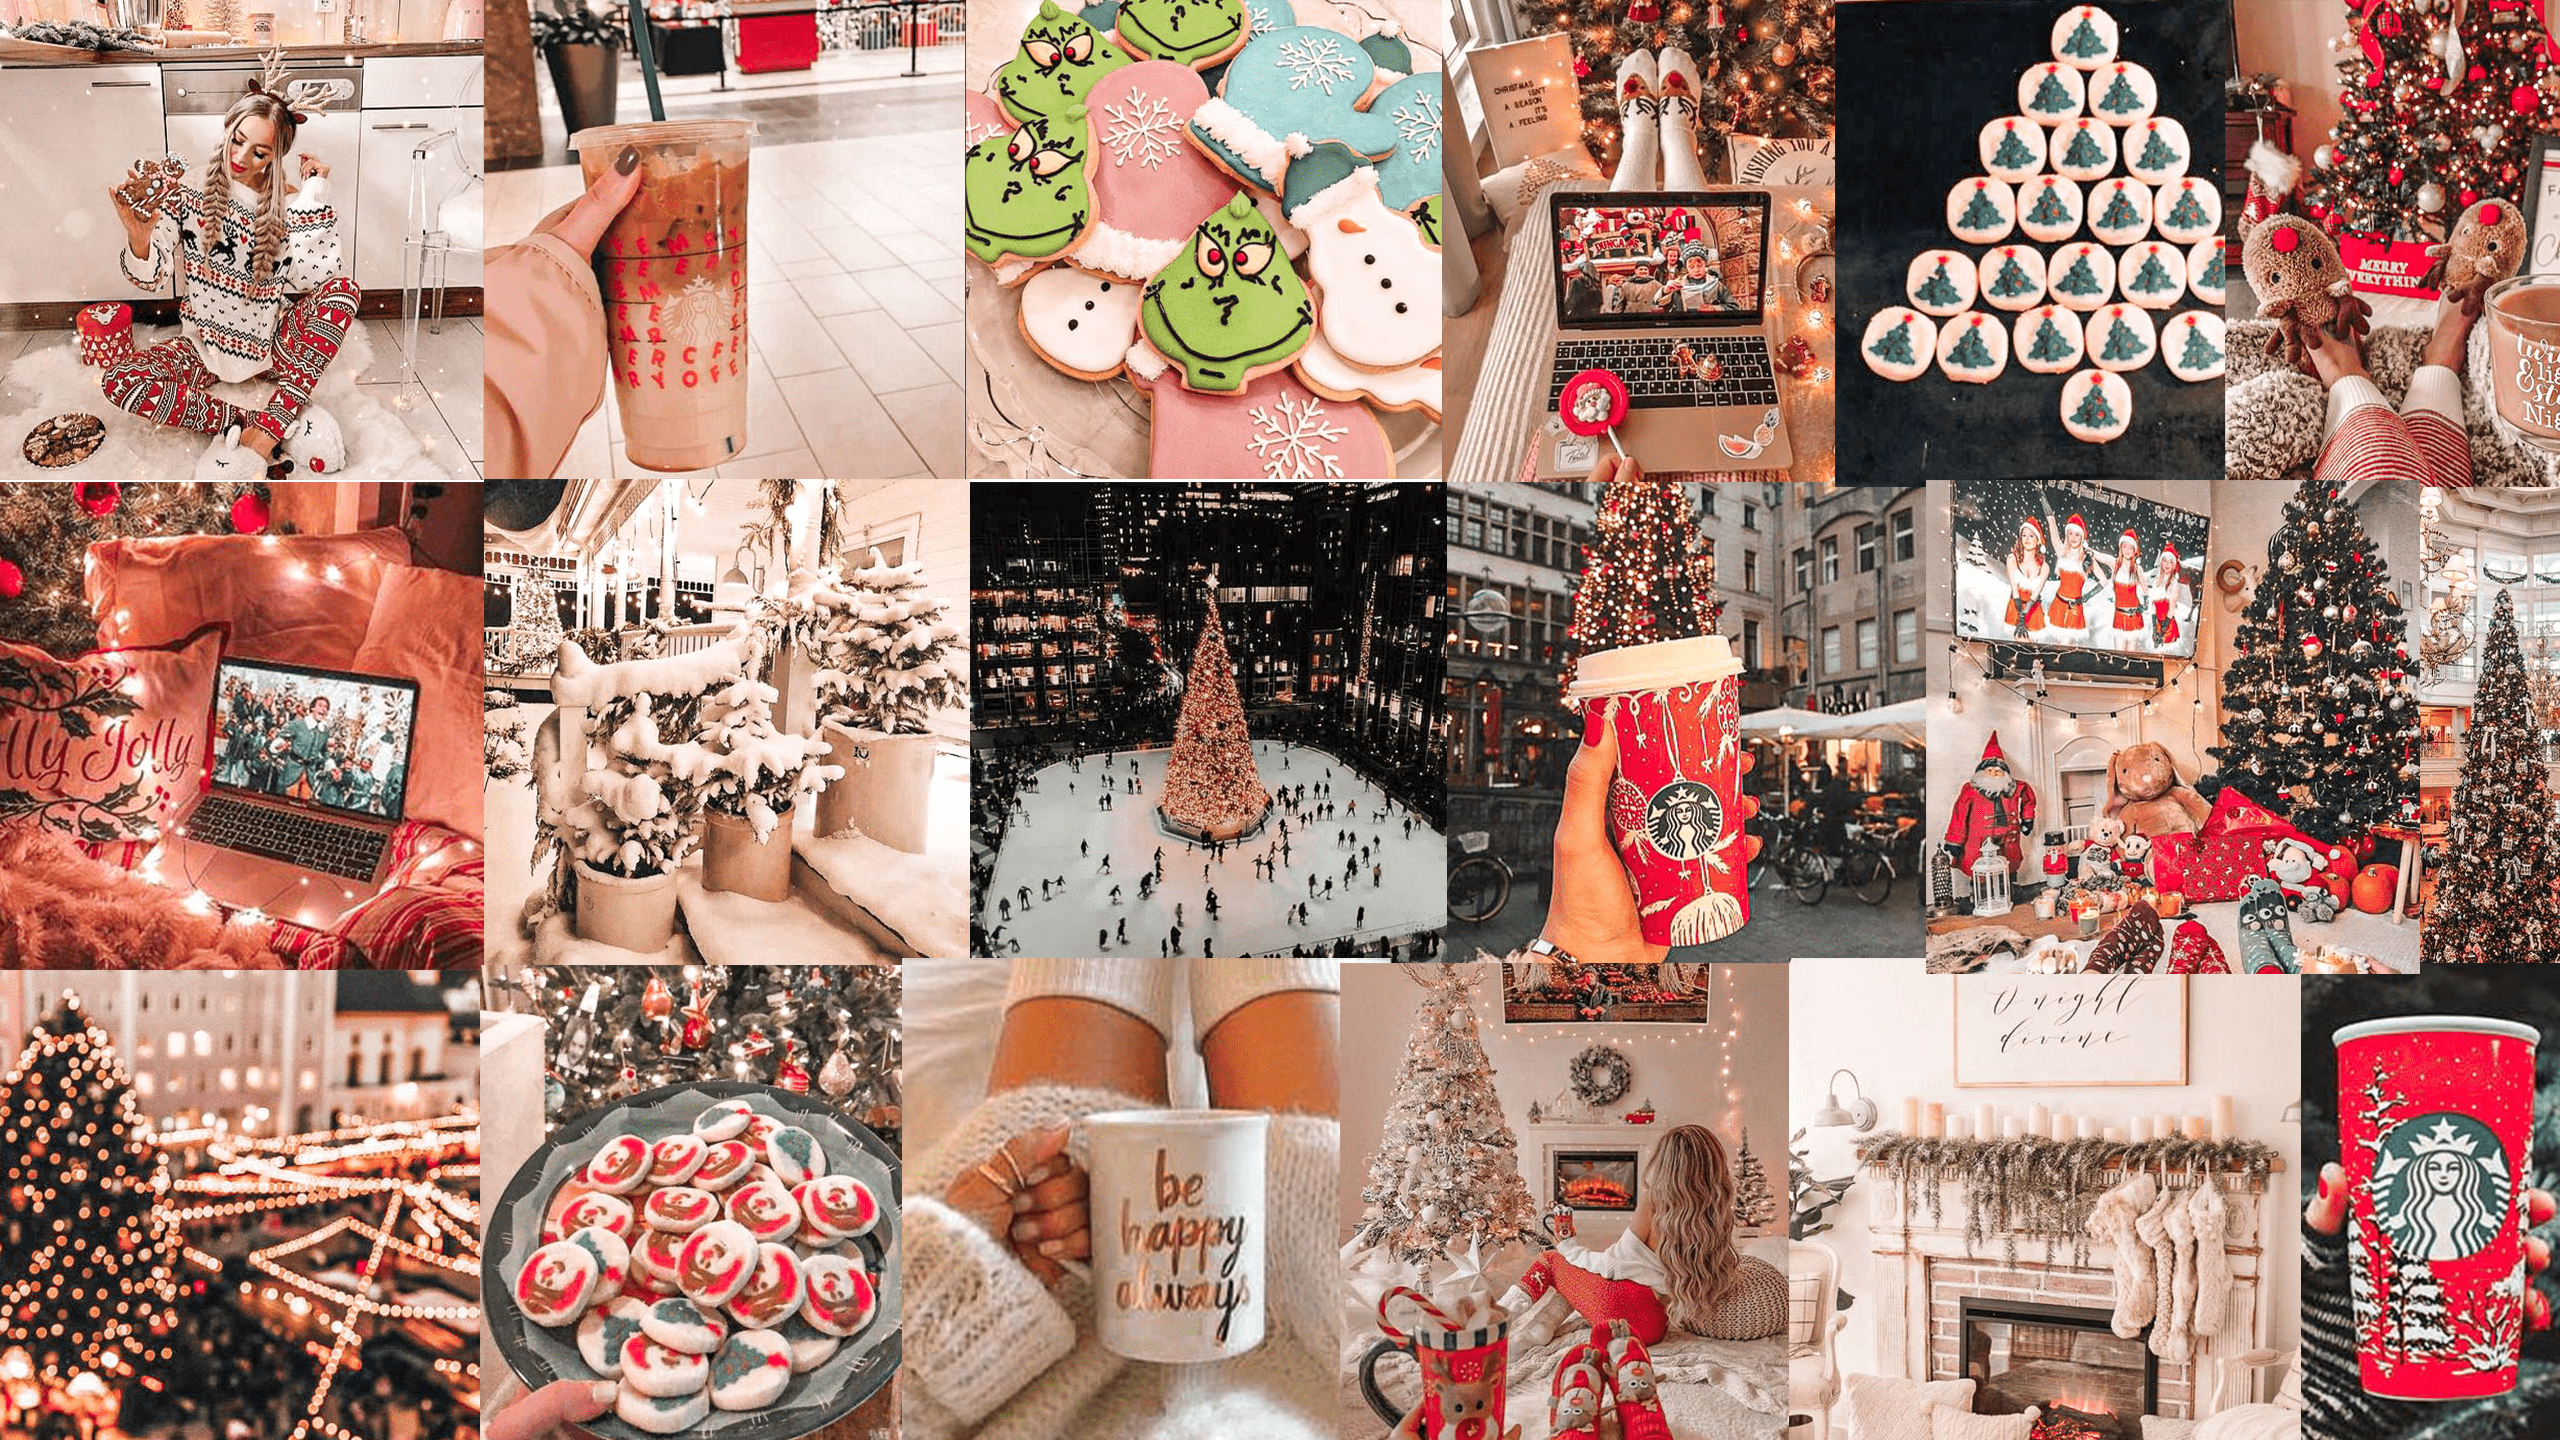 A collage of Christmas photos including gingerbread cookies, a fireplace, and a Starbucks cup. - IMac